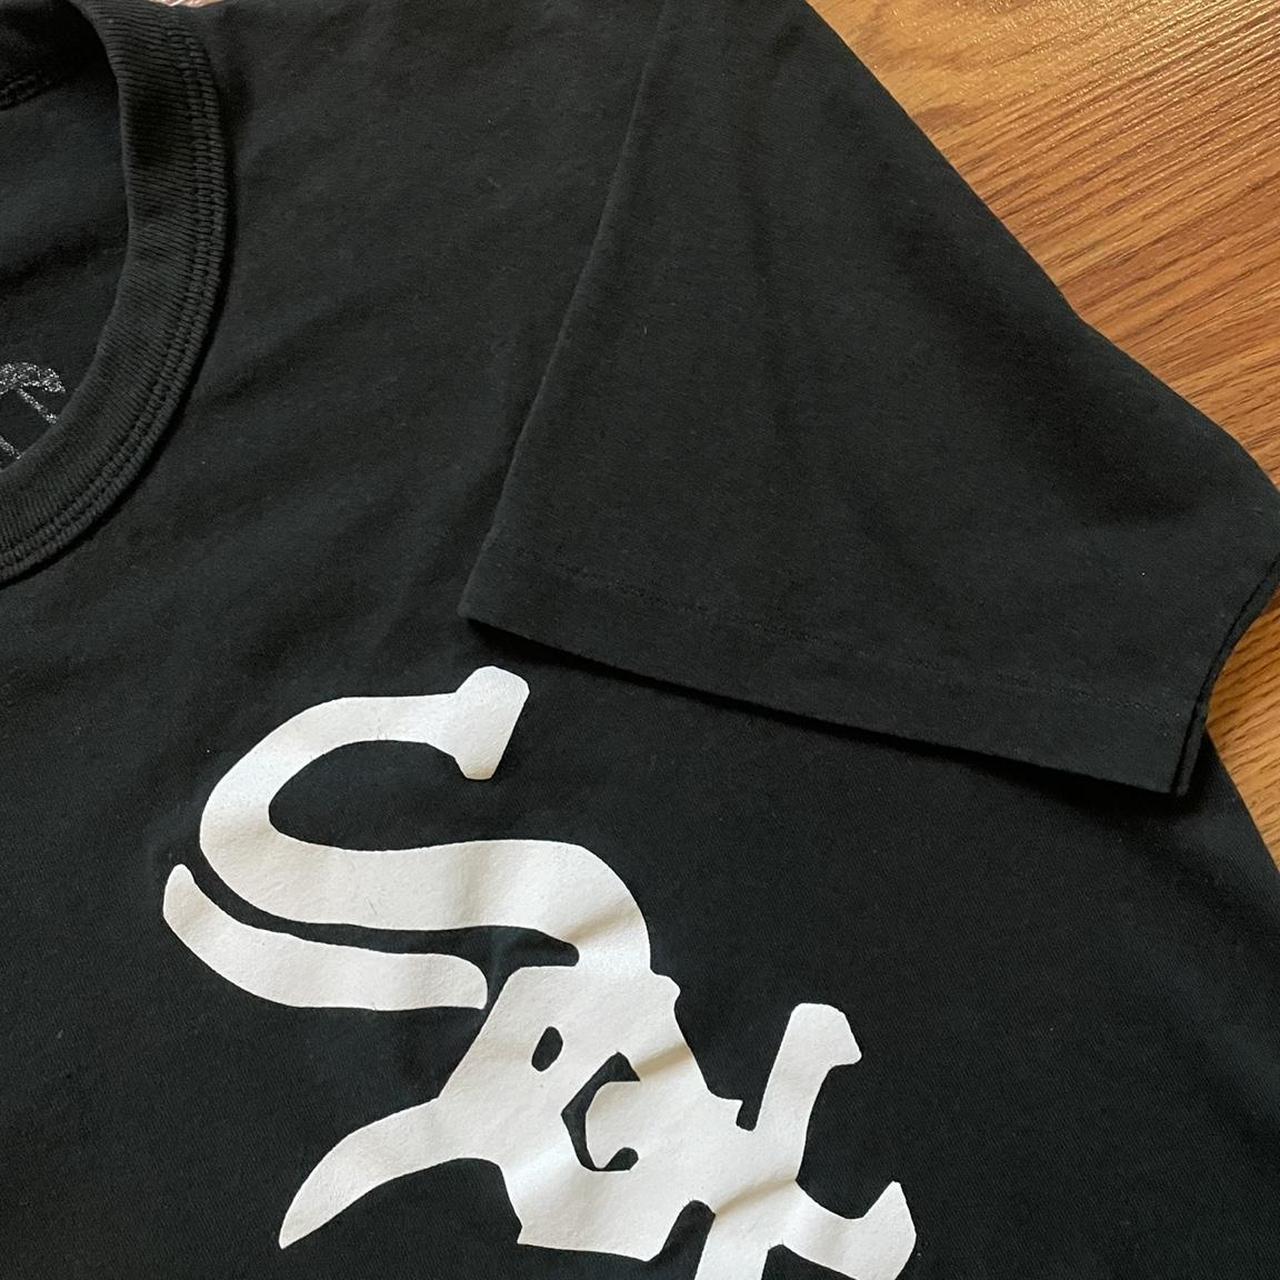 Vintage White Sox Jersey. Vintage Russell Athletic - Depop